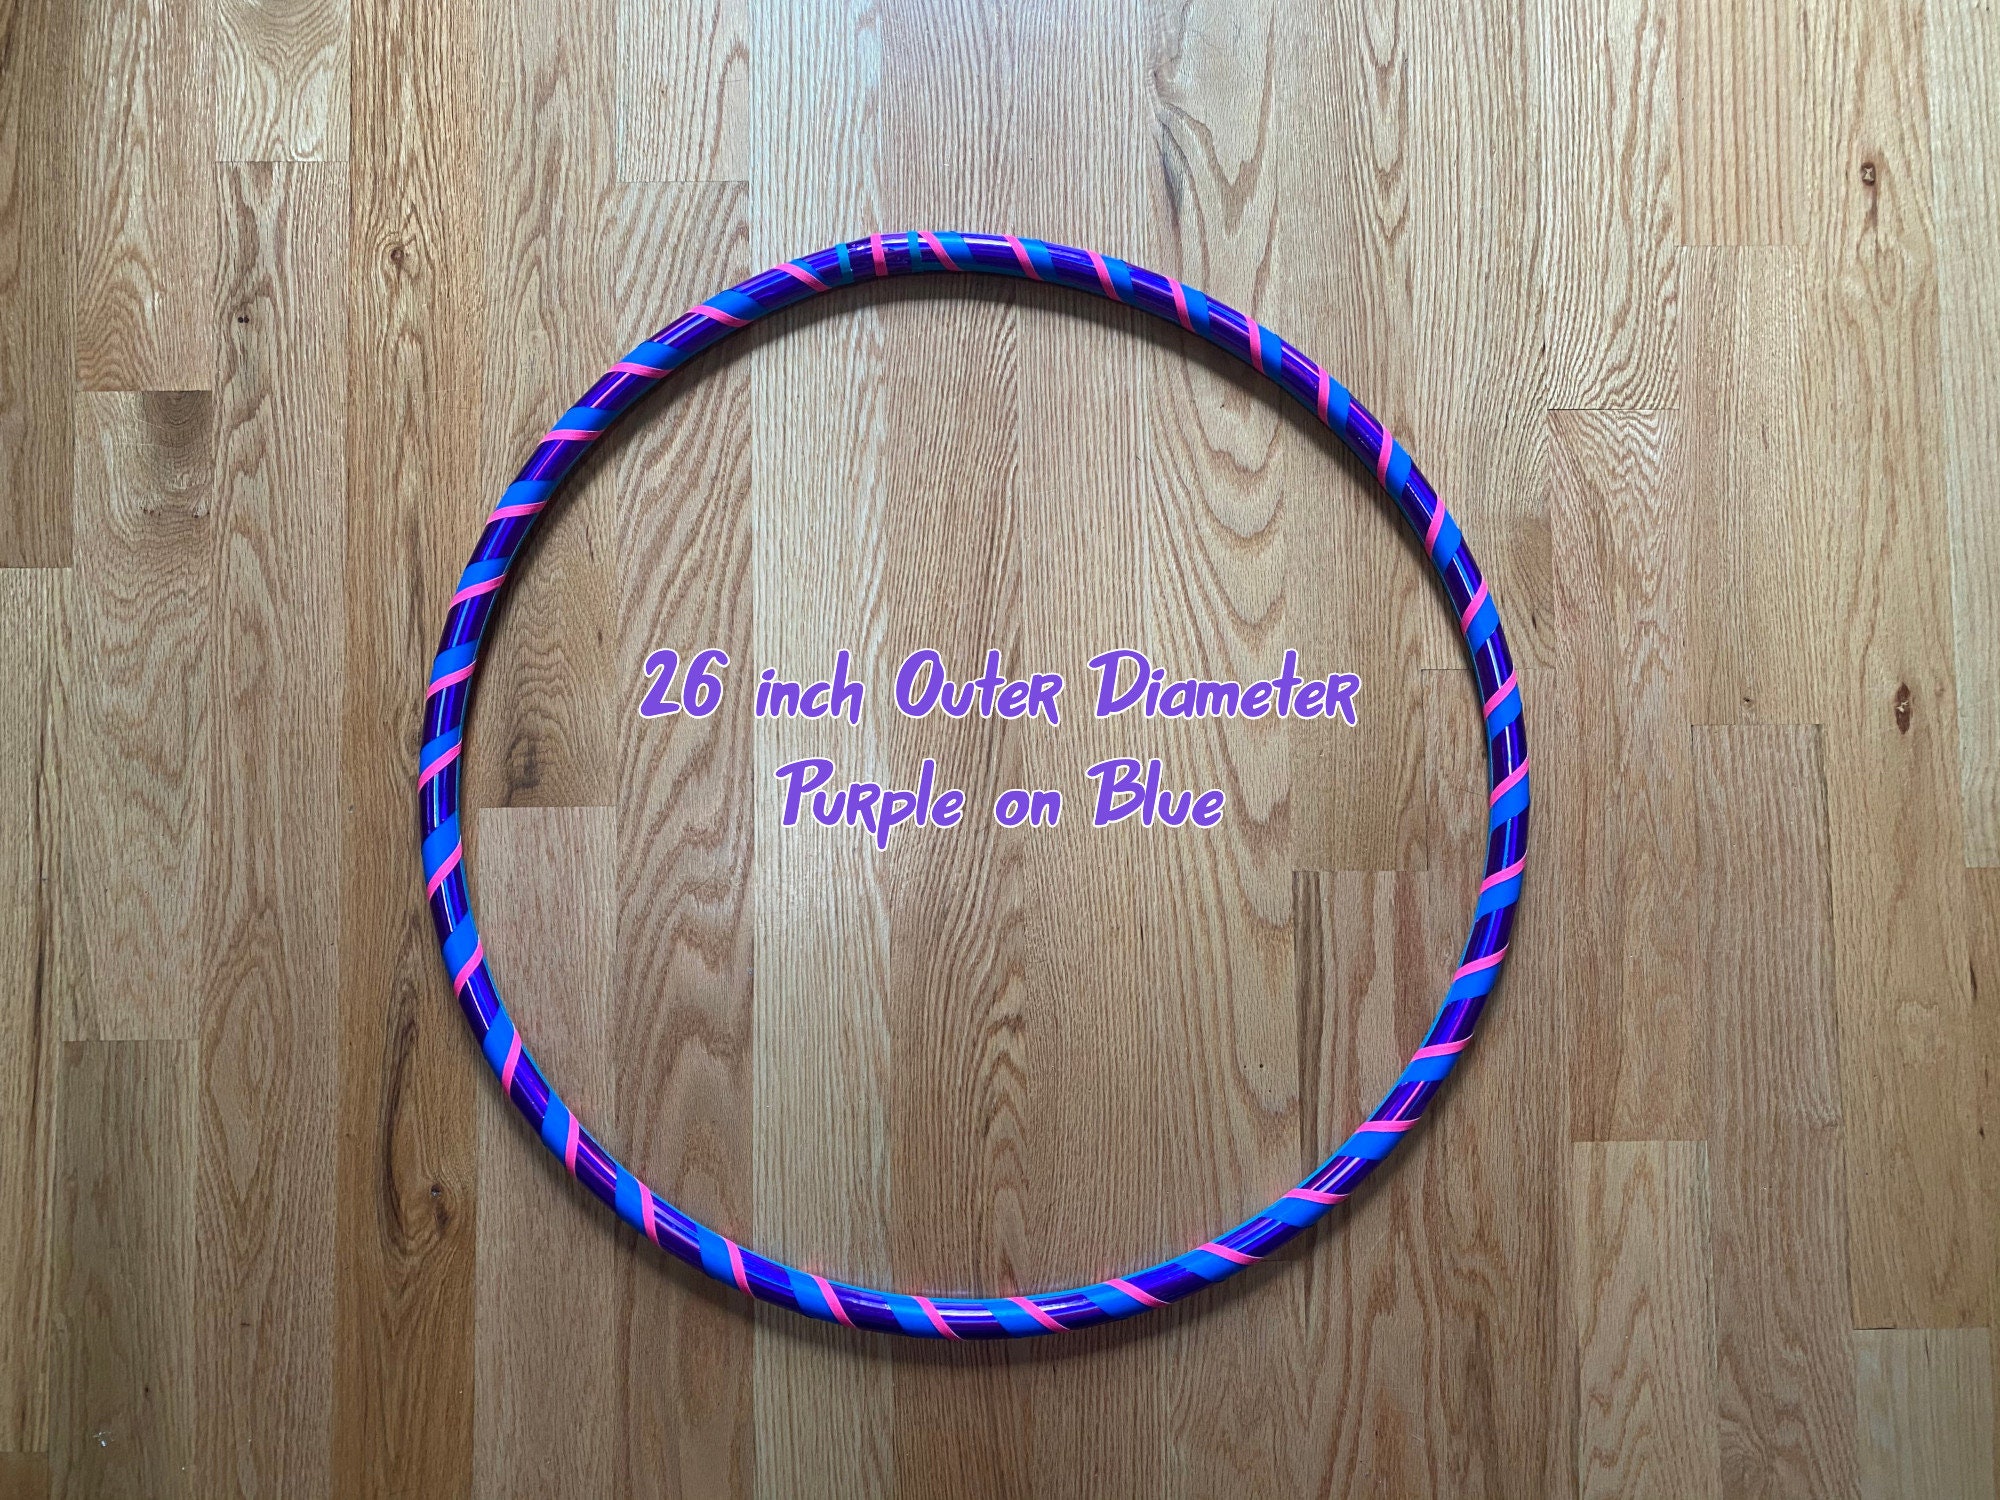 Kids' Hula Hoops, Toddler and Child Sizes, Multicolor, Decorative, Bright  Patterns, Durable and Made in USA 